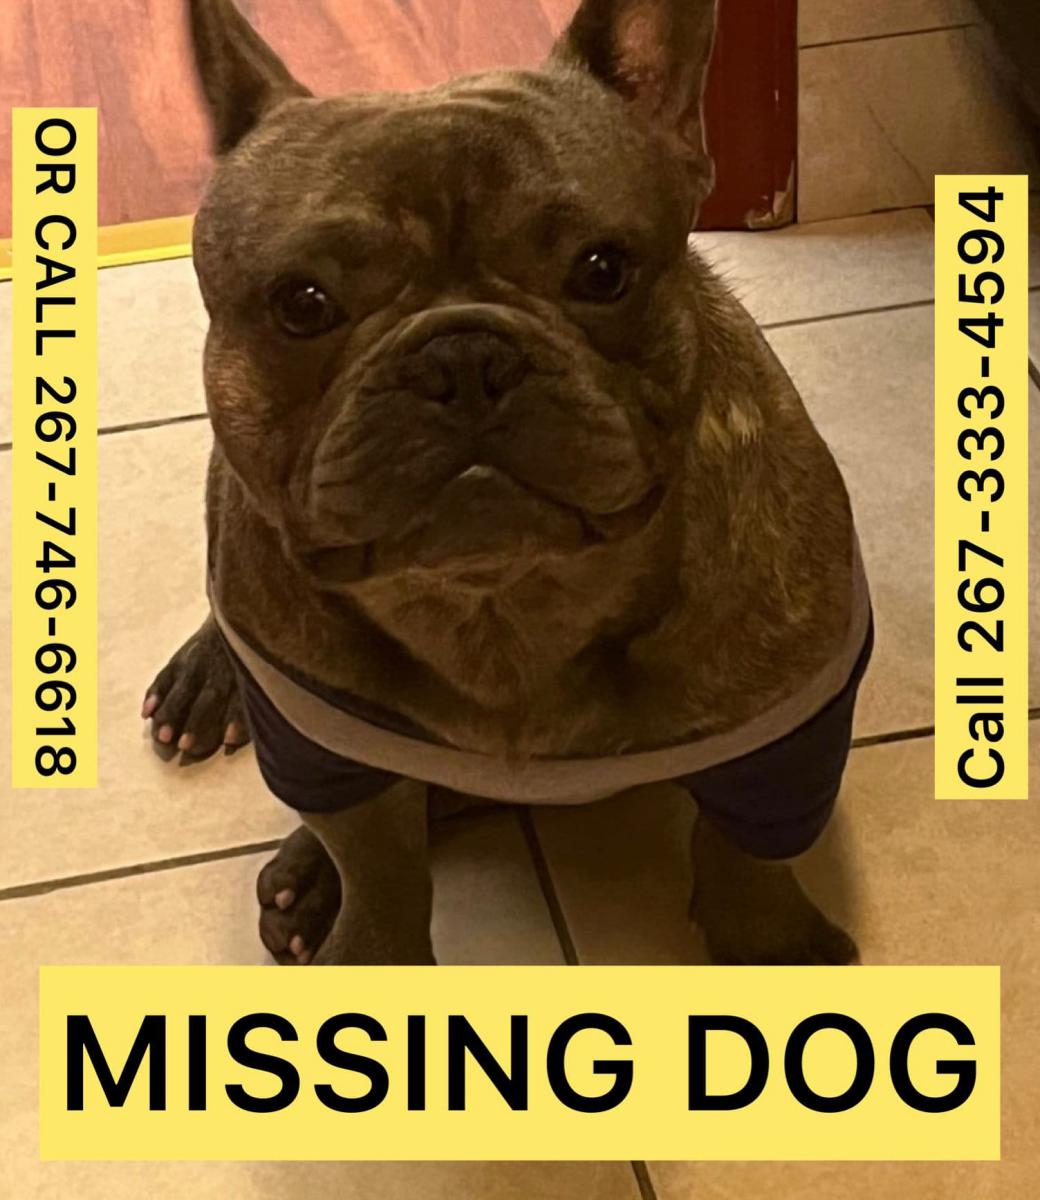 Image of knuckles, Lost Dog